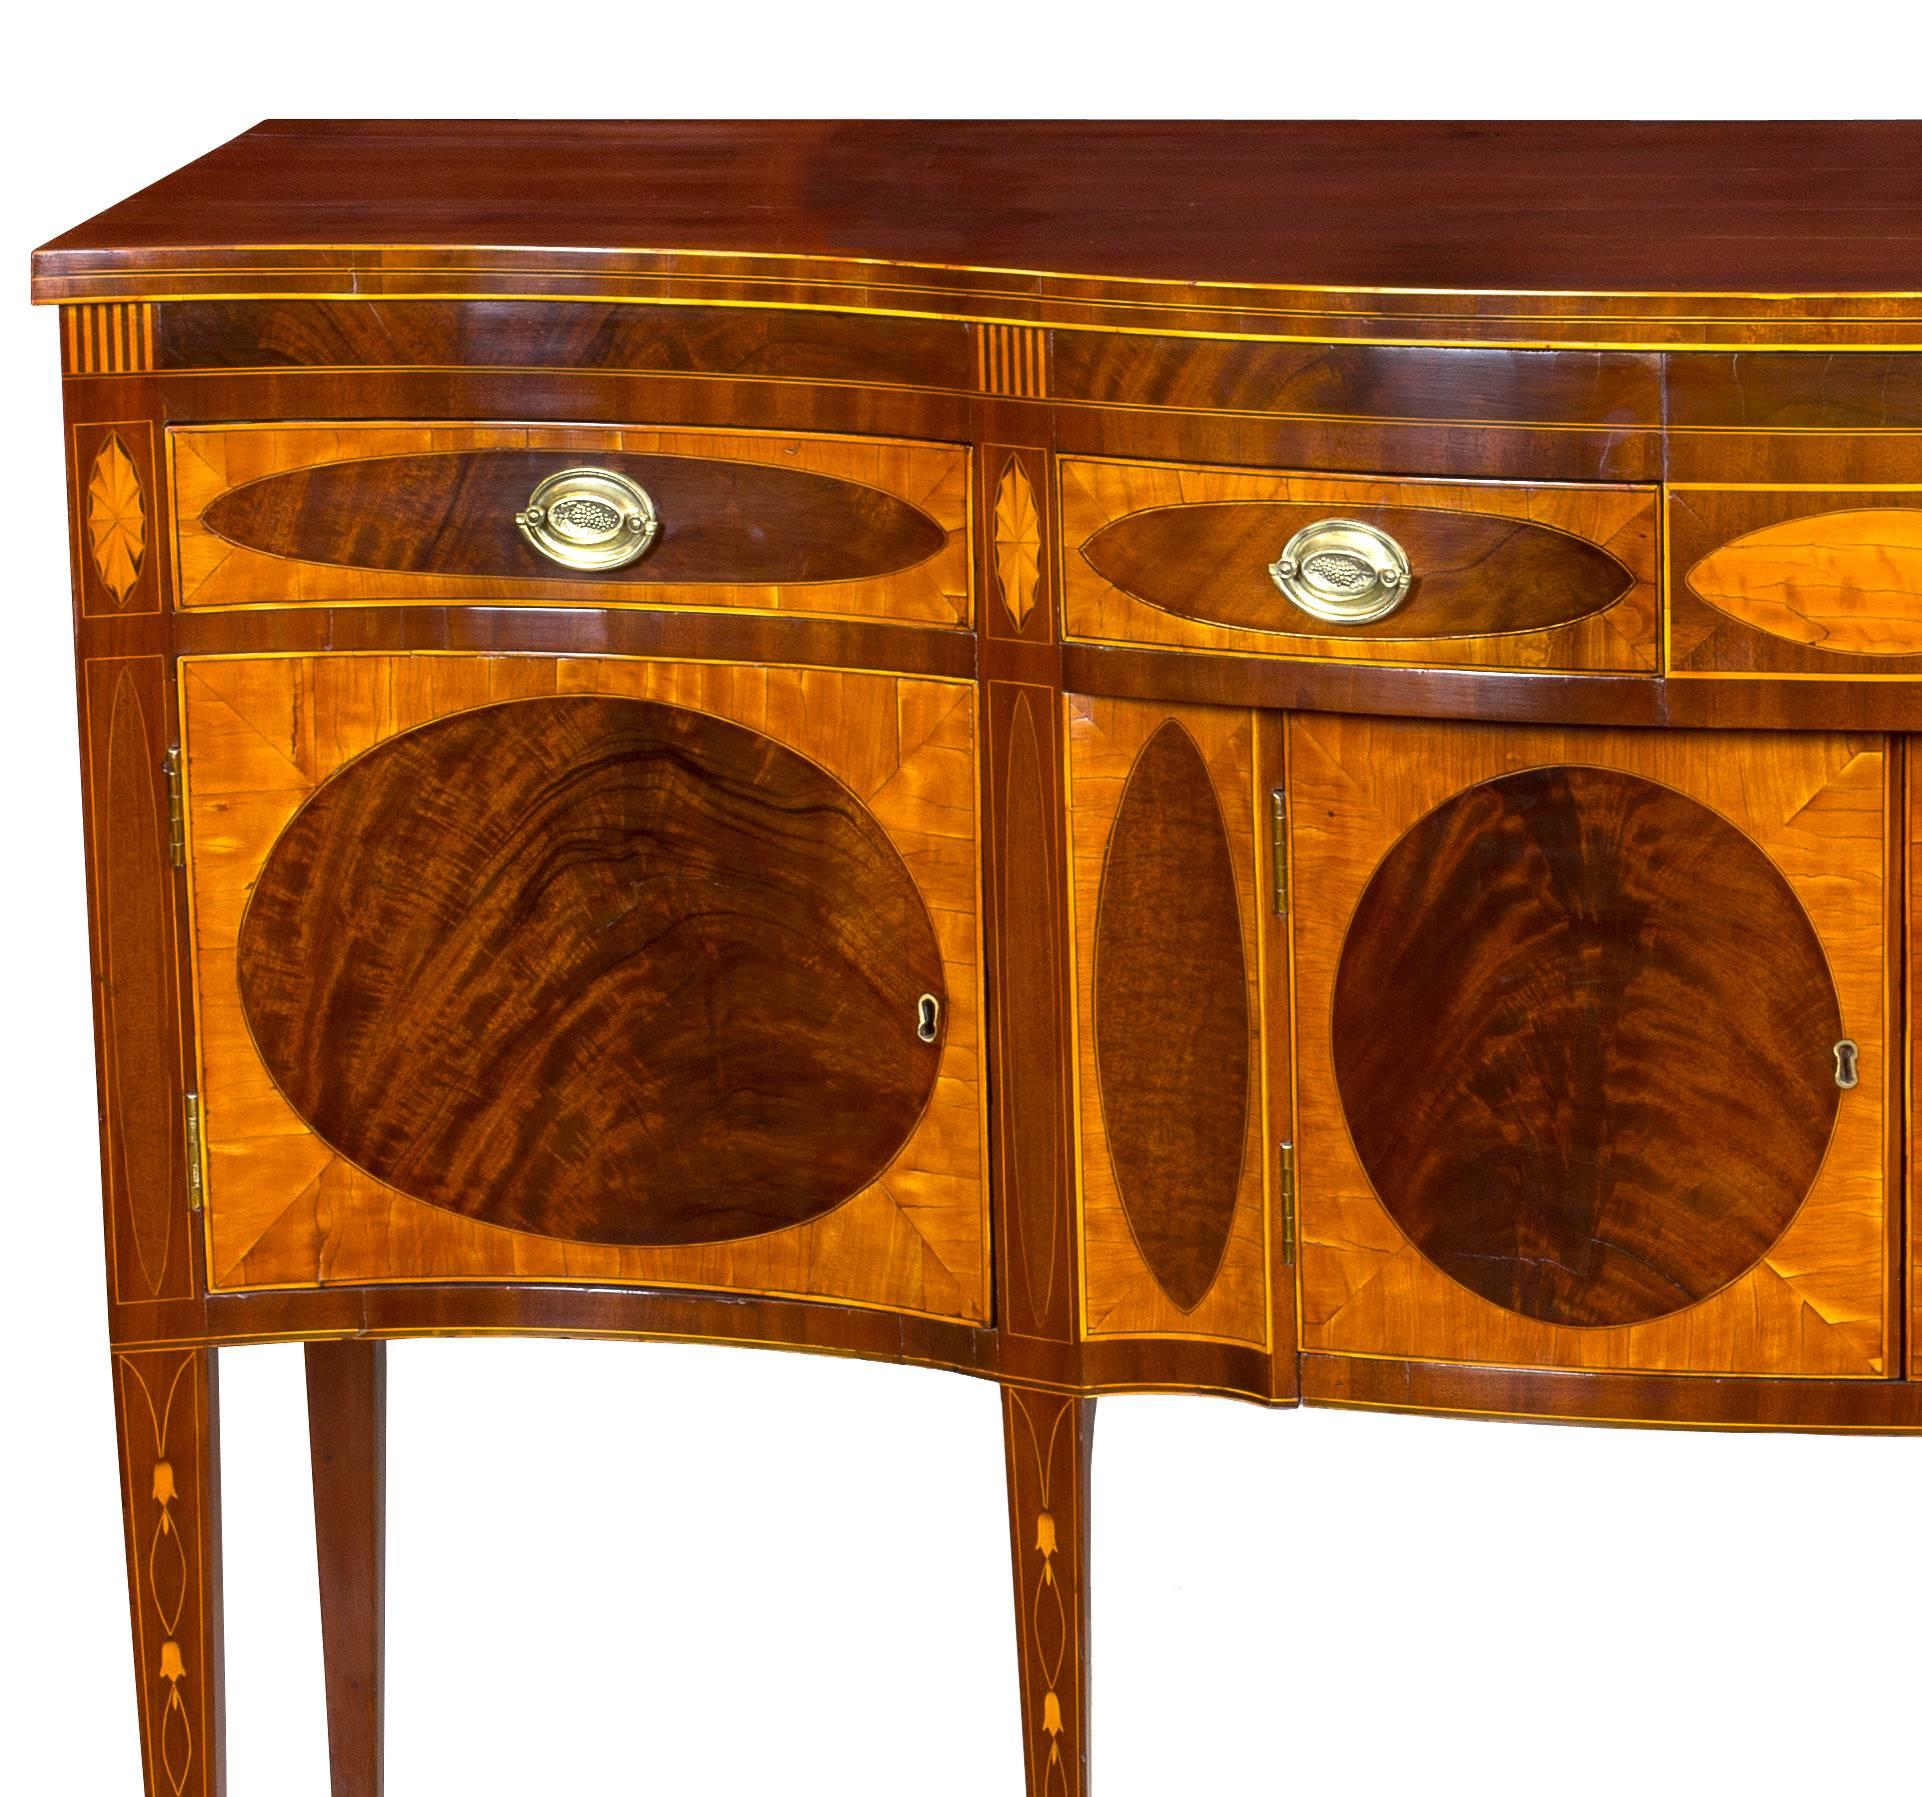 This is one of the finest sideboards in our collection and is composed of brilliant rarely found satinwood and profusely inlaid with bellflowers, patera and line inlay. It is of serpentine form, which is the most desirable form that these sideboards